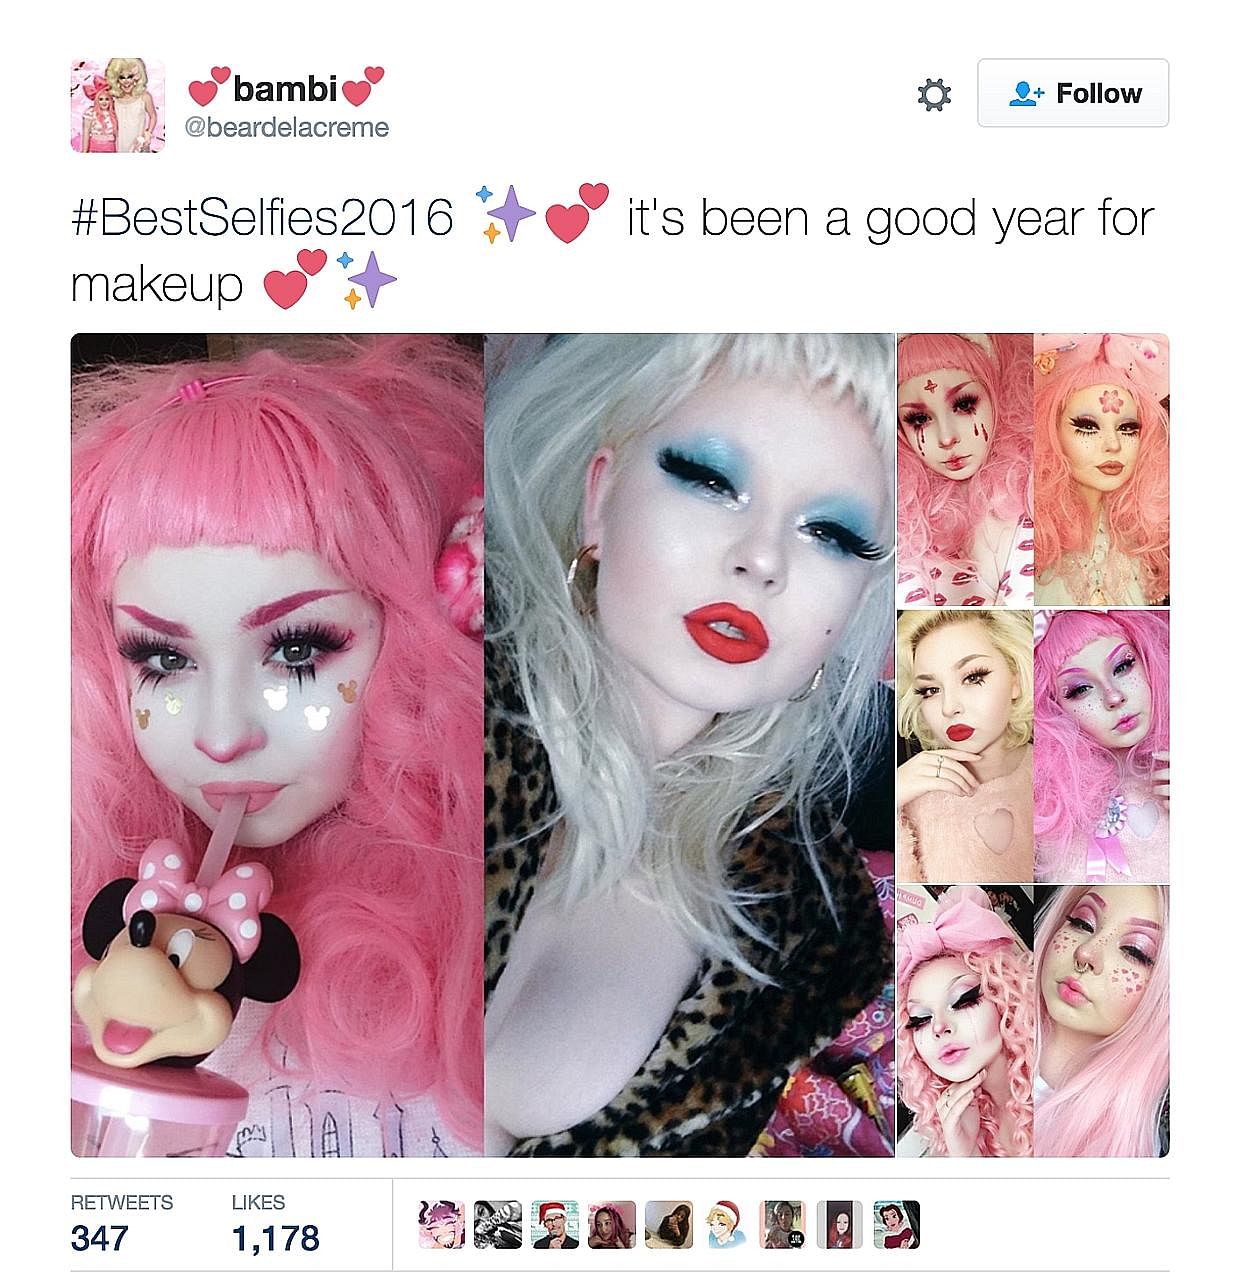 Twitter users have posted the best selfies they took throughout this year on the platform, with this user profiling her many make-up achievements to catch the eye of others.